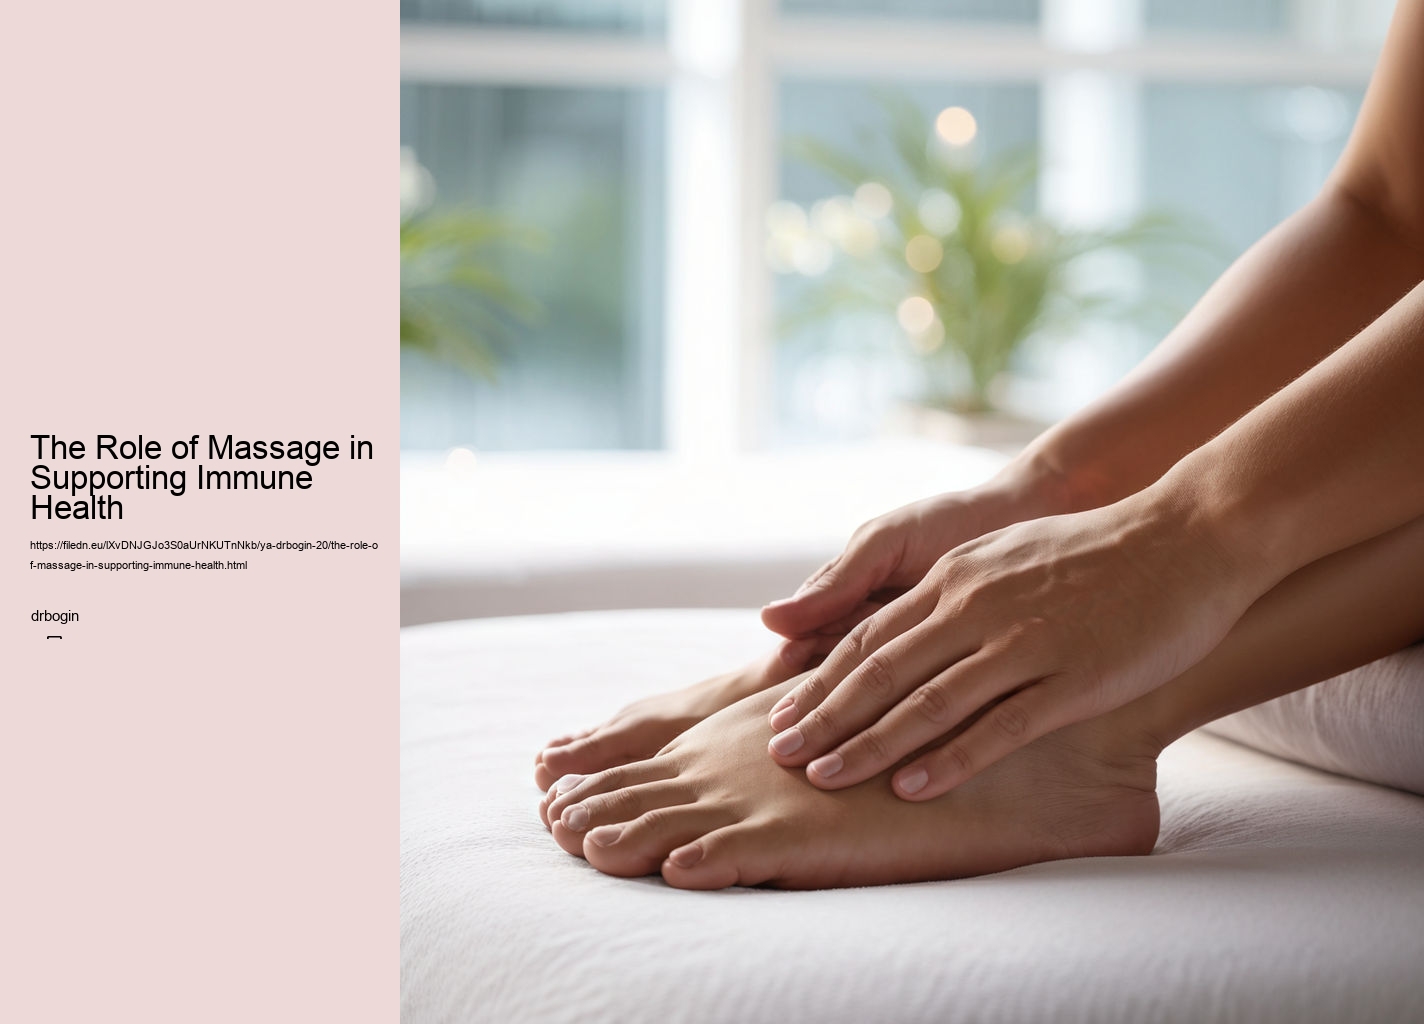 The Role of Massage in Supporting Immune Health